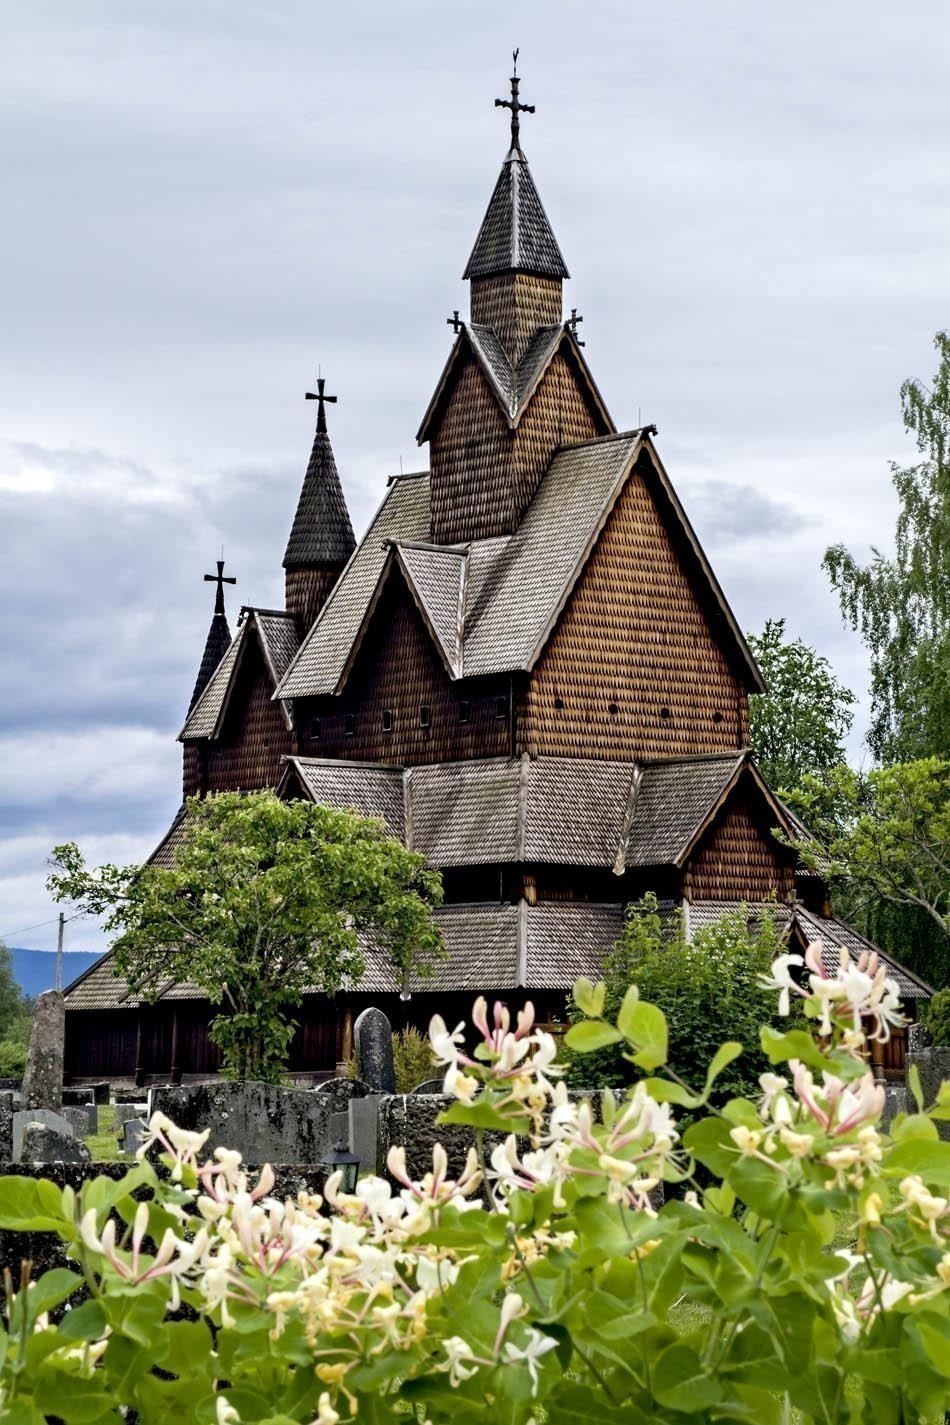 The Stave Church Heddal is around 26 meters height, the Biggest in its kind in Norway | Norway Travel Guide